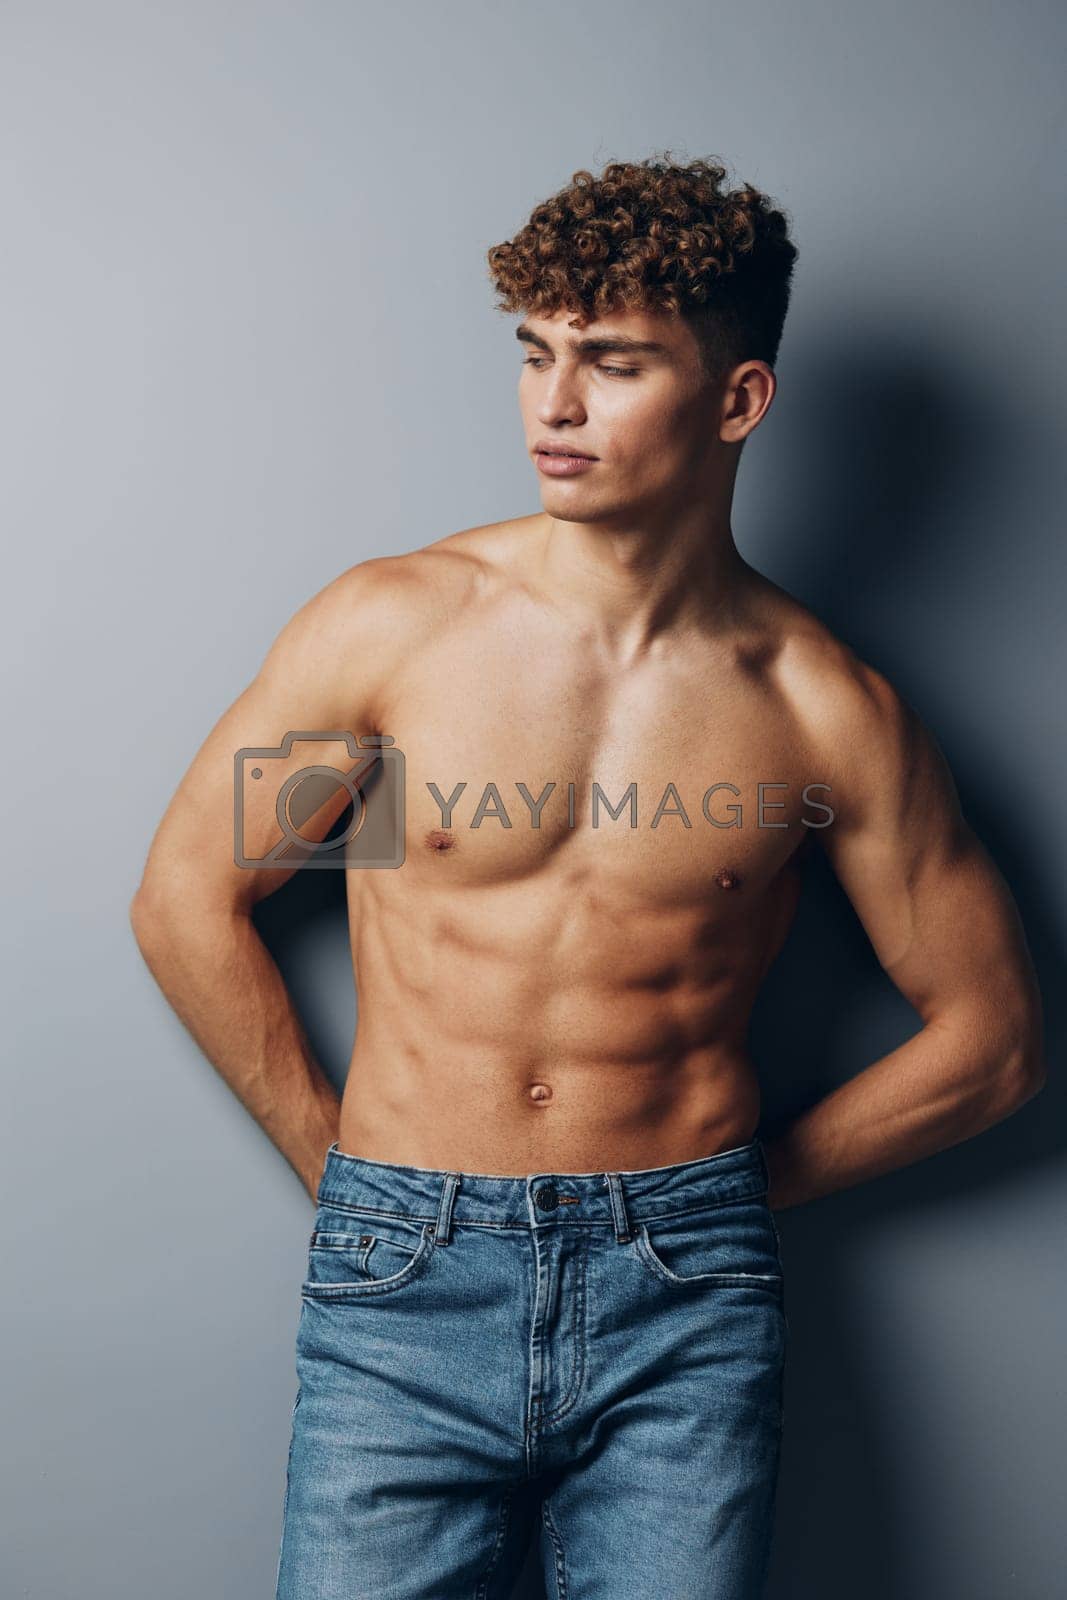 Royalty free image of man beauty fashion care studio strong fit sport sexy model chest by SHOTPRIME